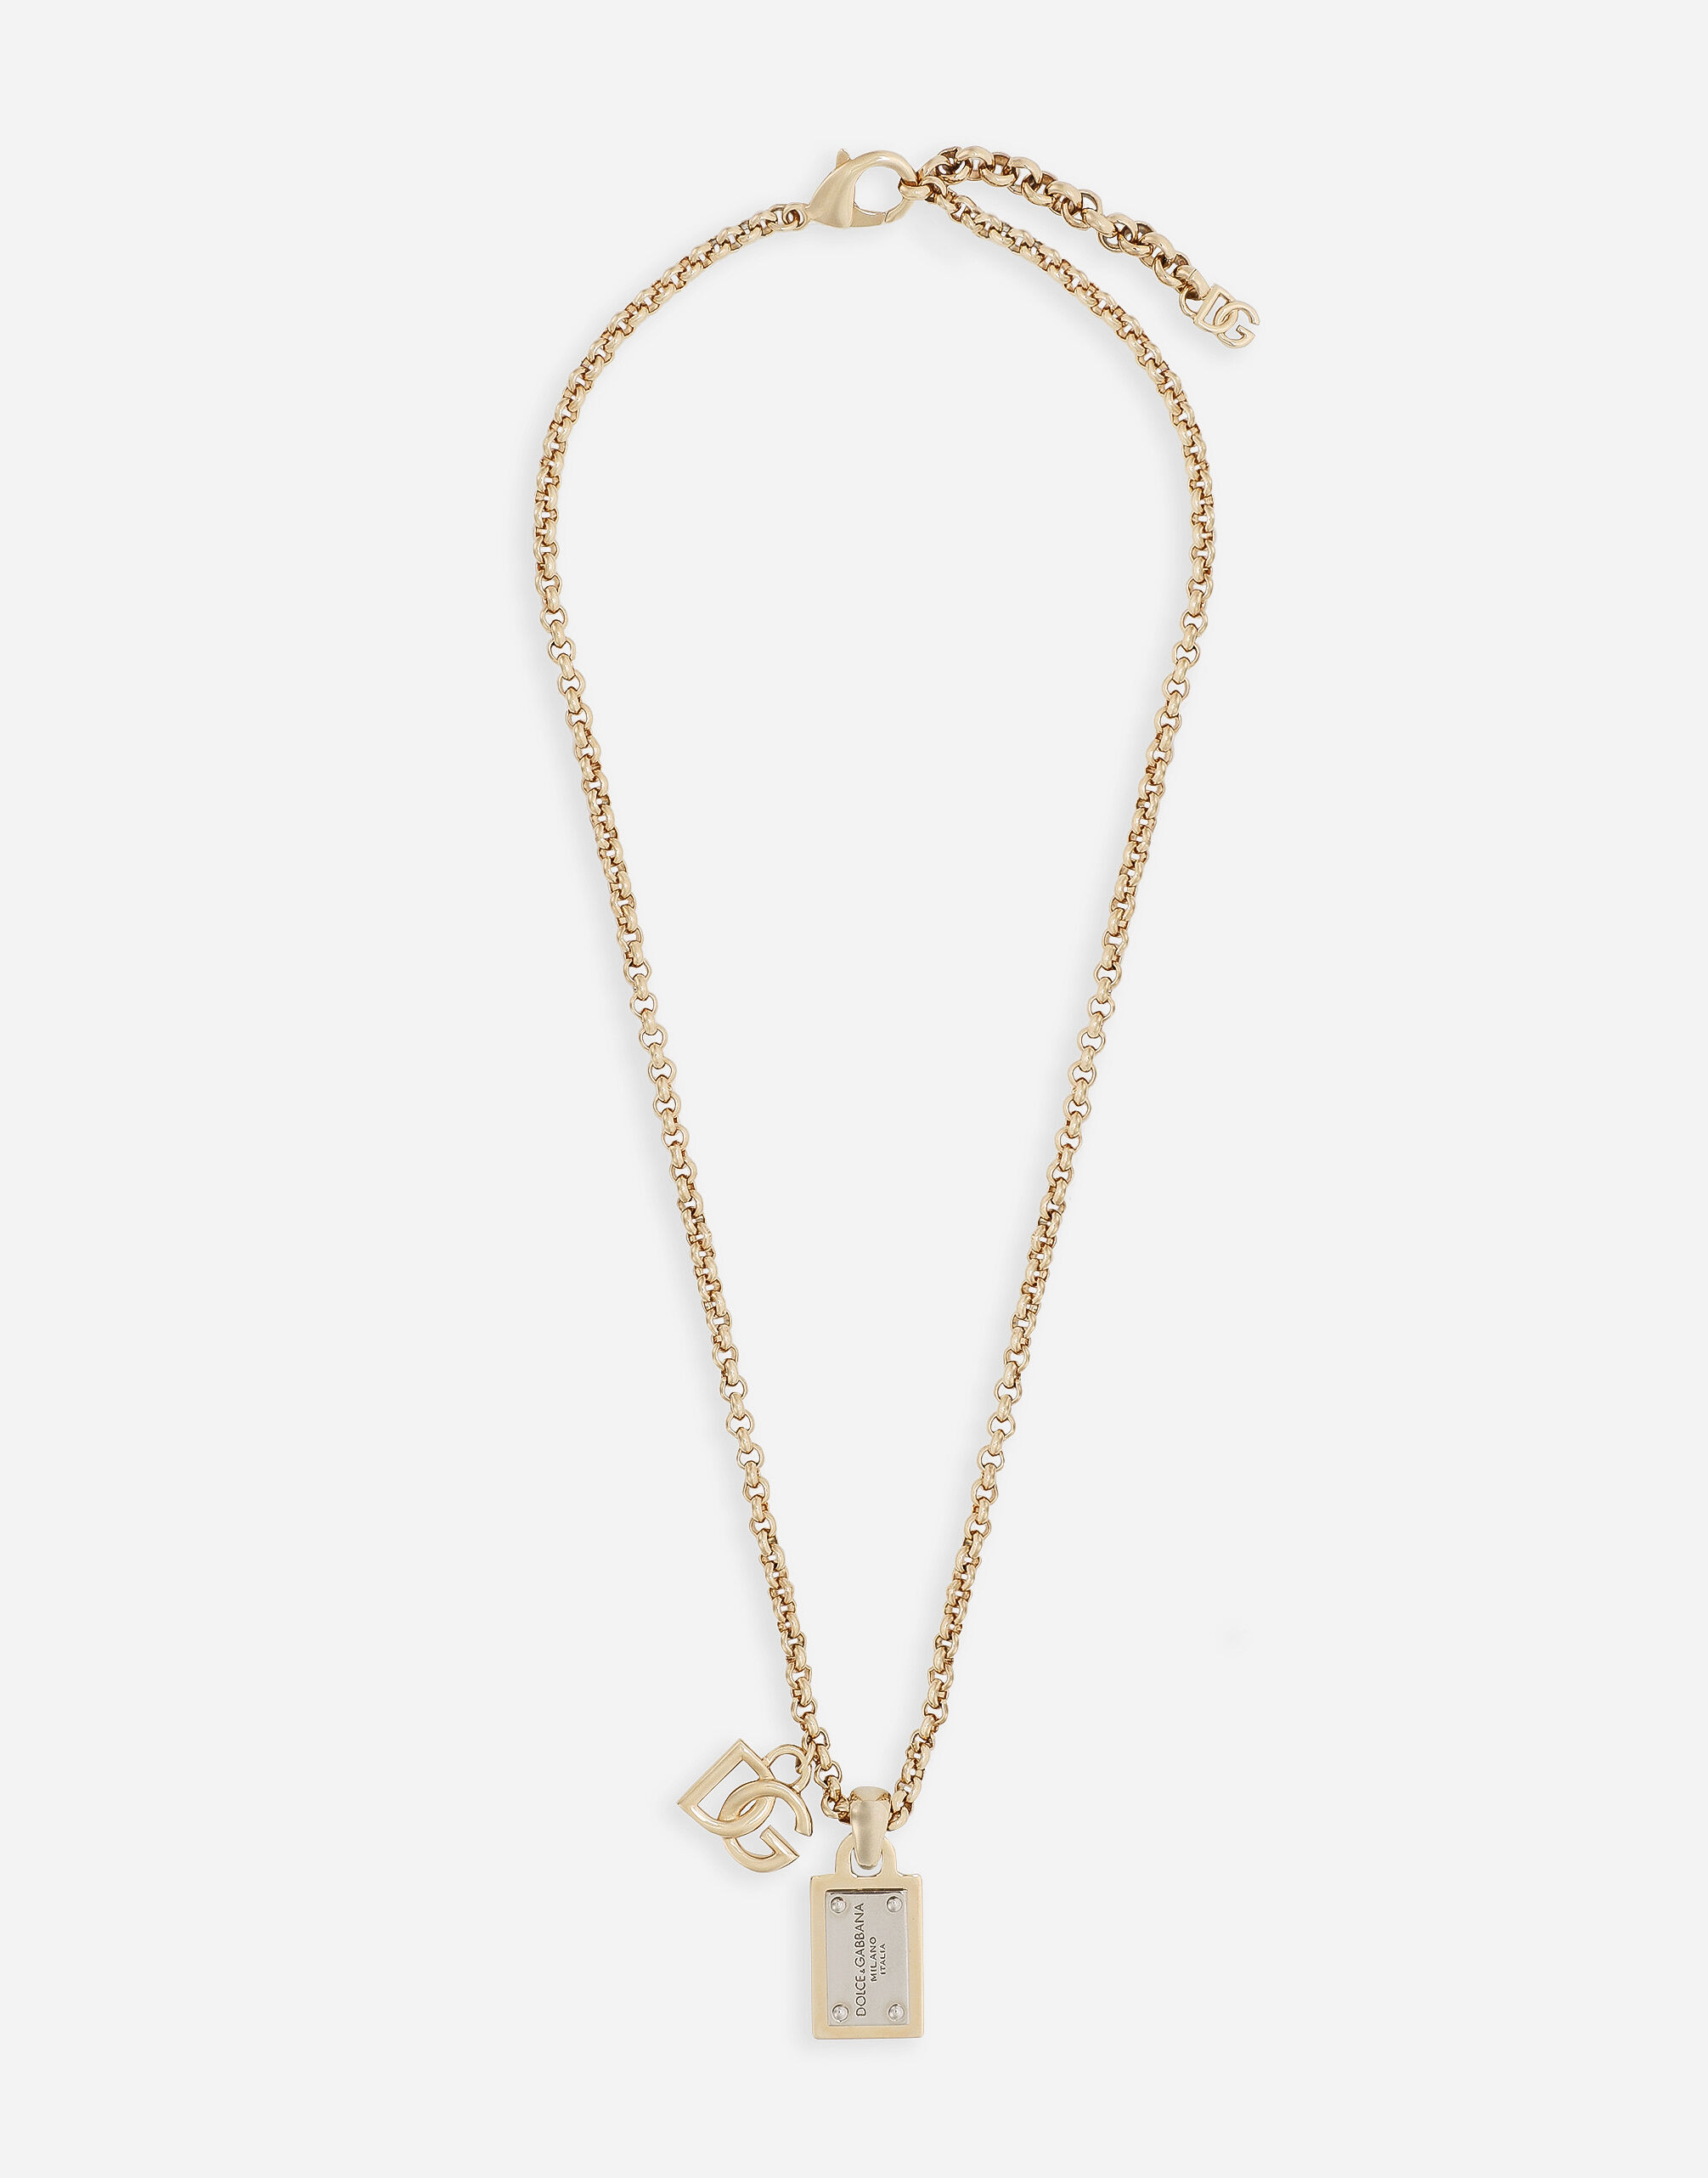 ${brand} Link necklace with DG logo and tag ${colorDescription} ${masterID}